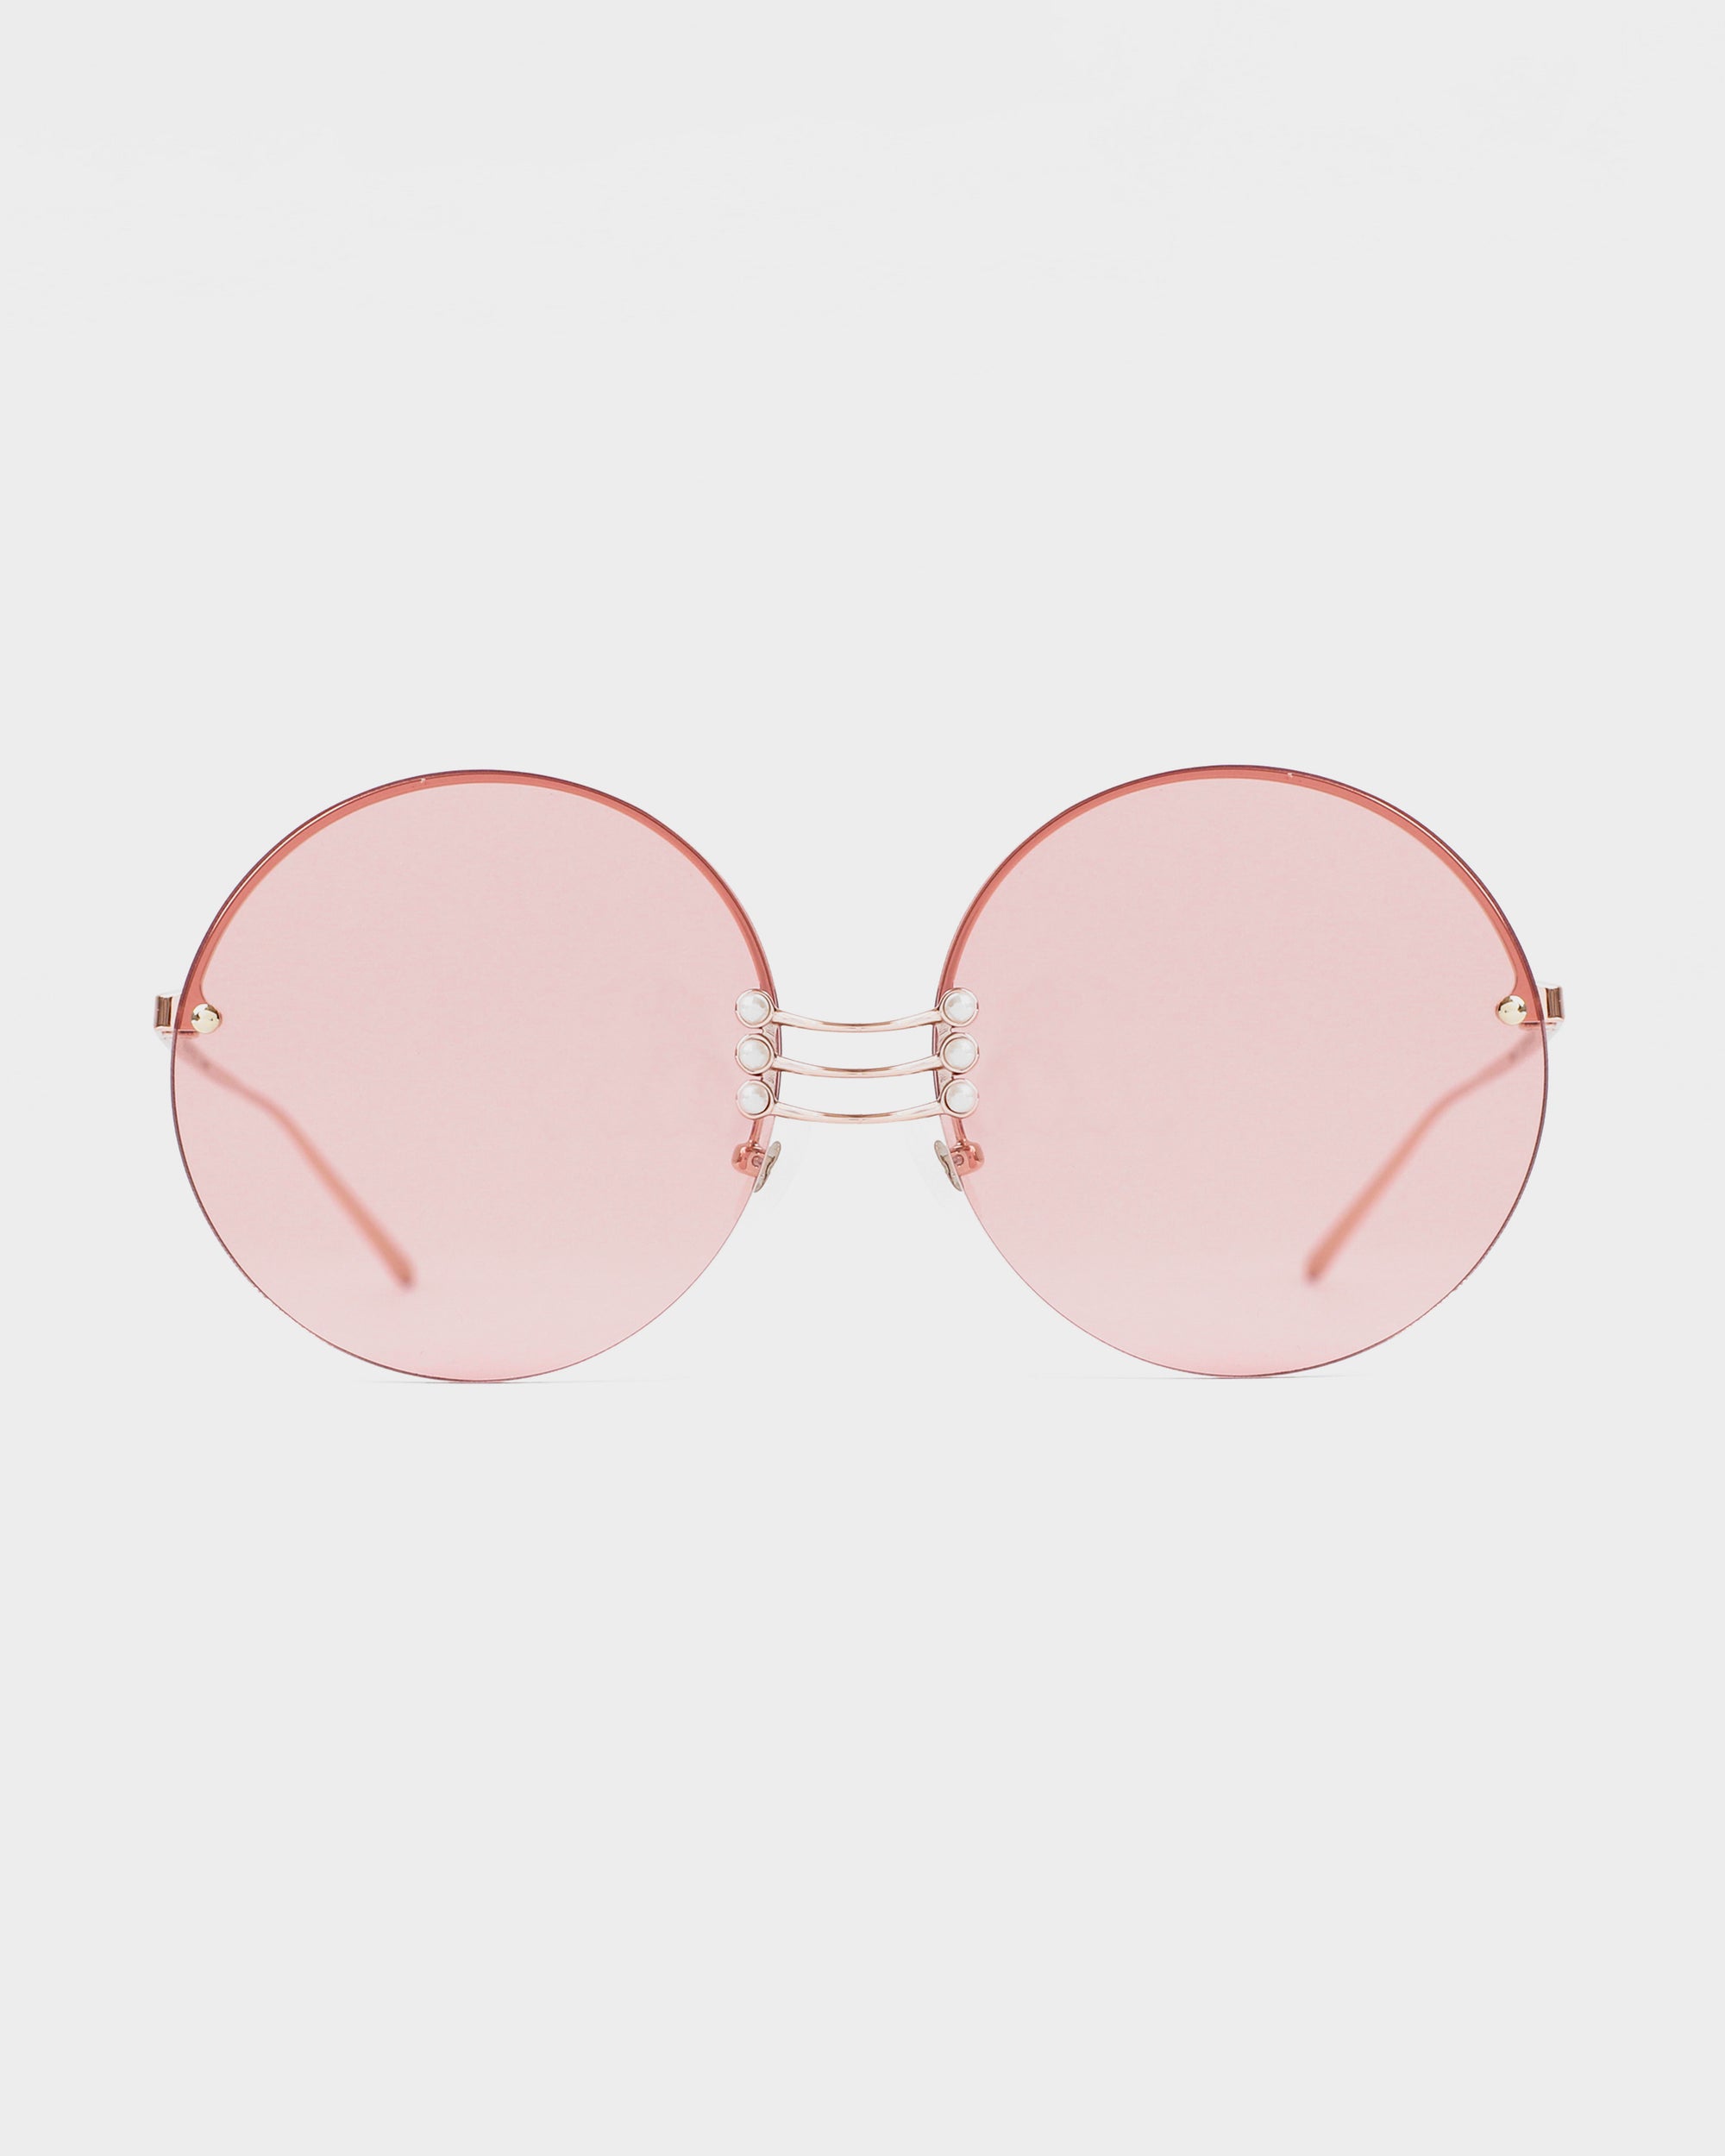 A pair of round, rimless For Art&#39;s Sake® Vermeer sunglasses with pink-tinted lenses. Featuring UV protection, the sunglasses boast gold-toned bridge and temple arms, stainless steel frames, and a unique nose bridge design with three parallel thin bars. Gemstone nosepads add a touch of elegance. The background is plain white.